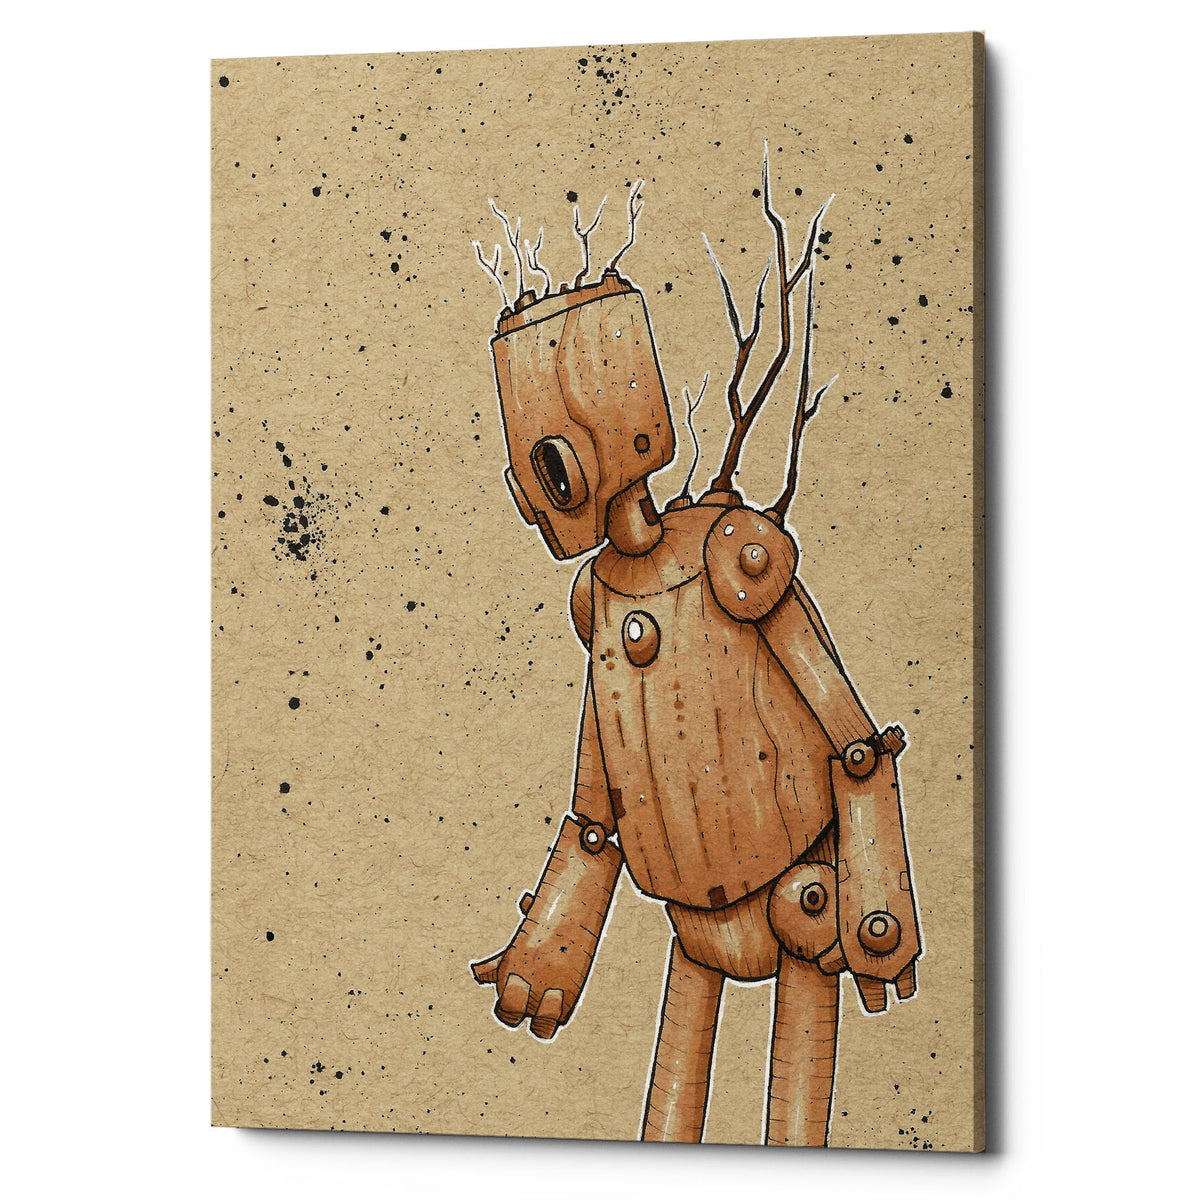 Epic Graffiti &quot;Ink Bot Tree&quot; by Craig Snodgrass, Giclee Canvas Wall Art